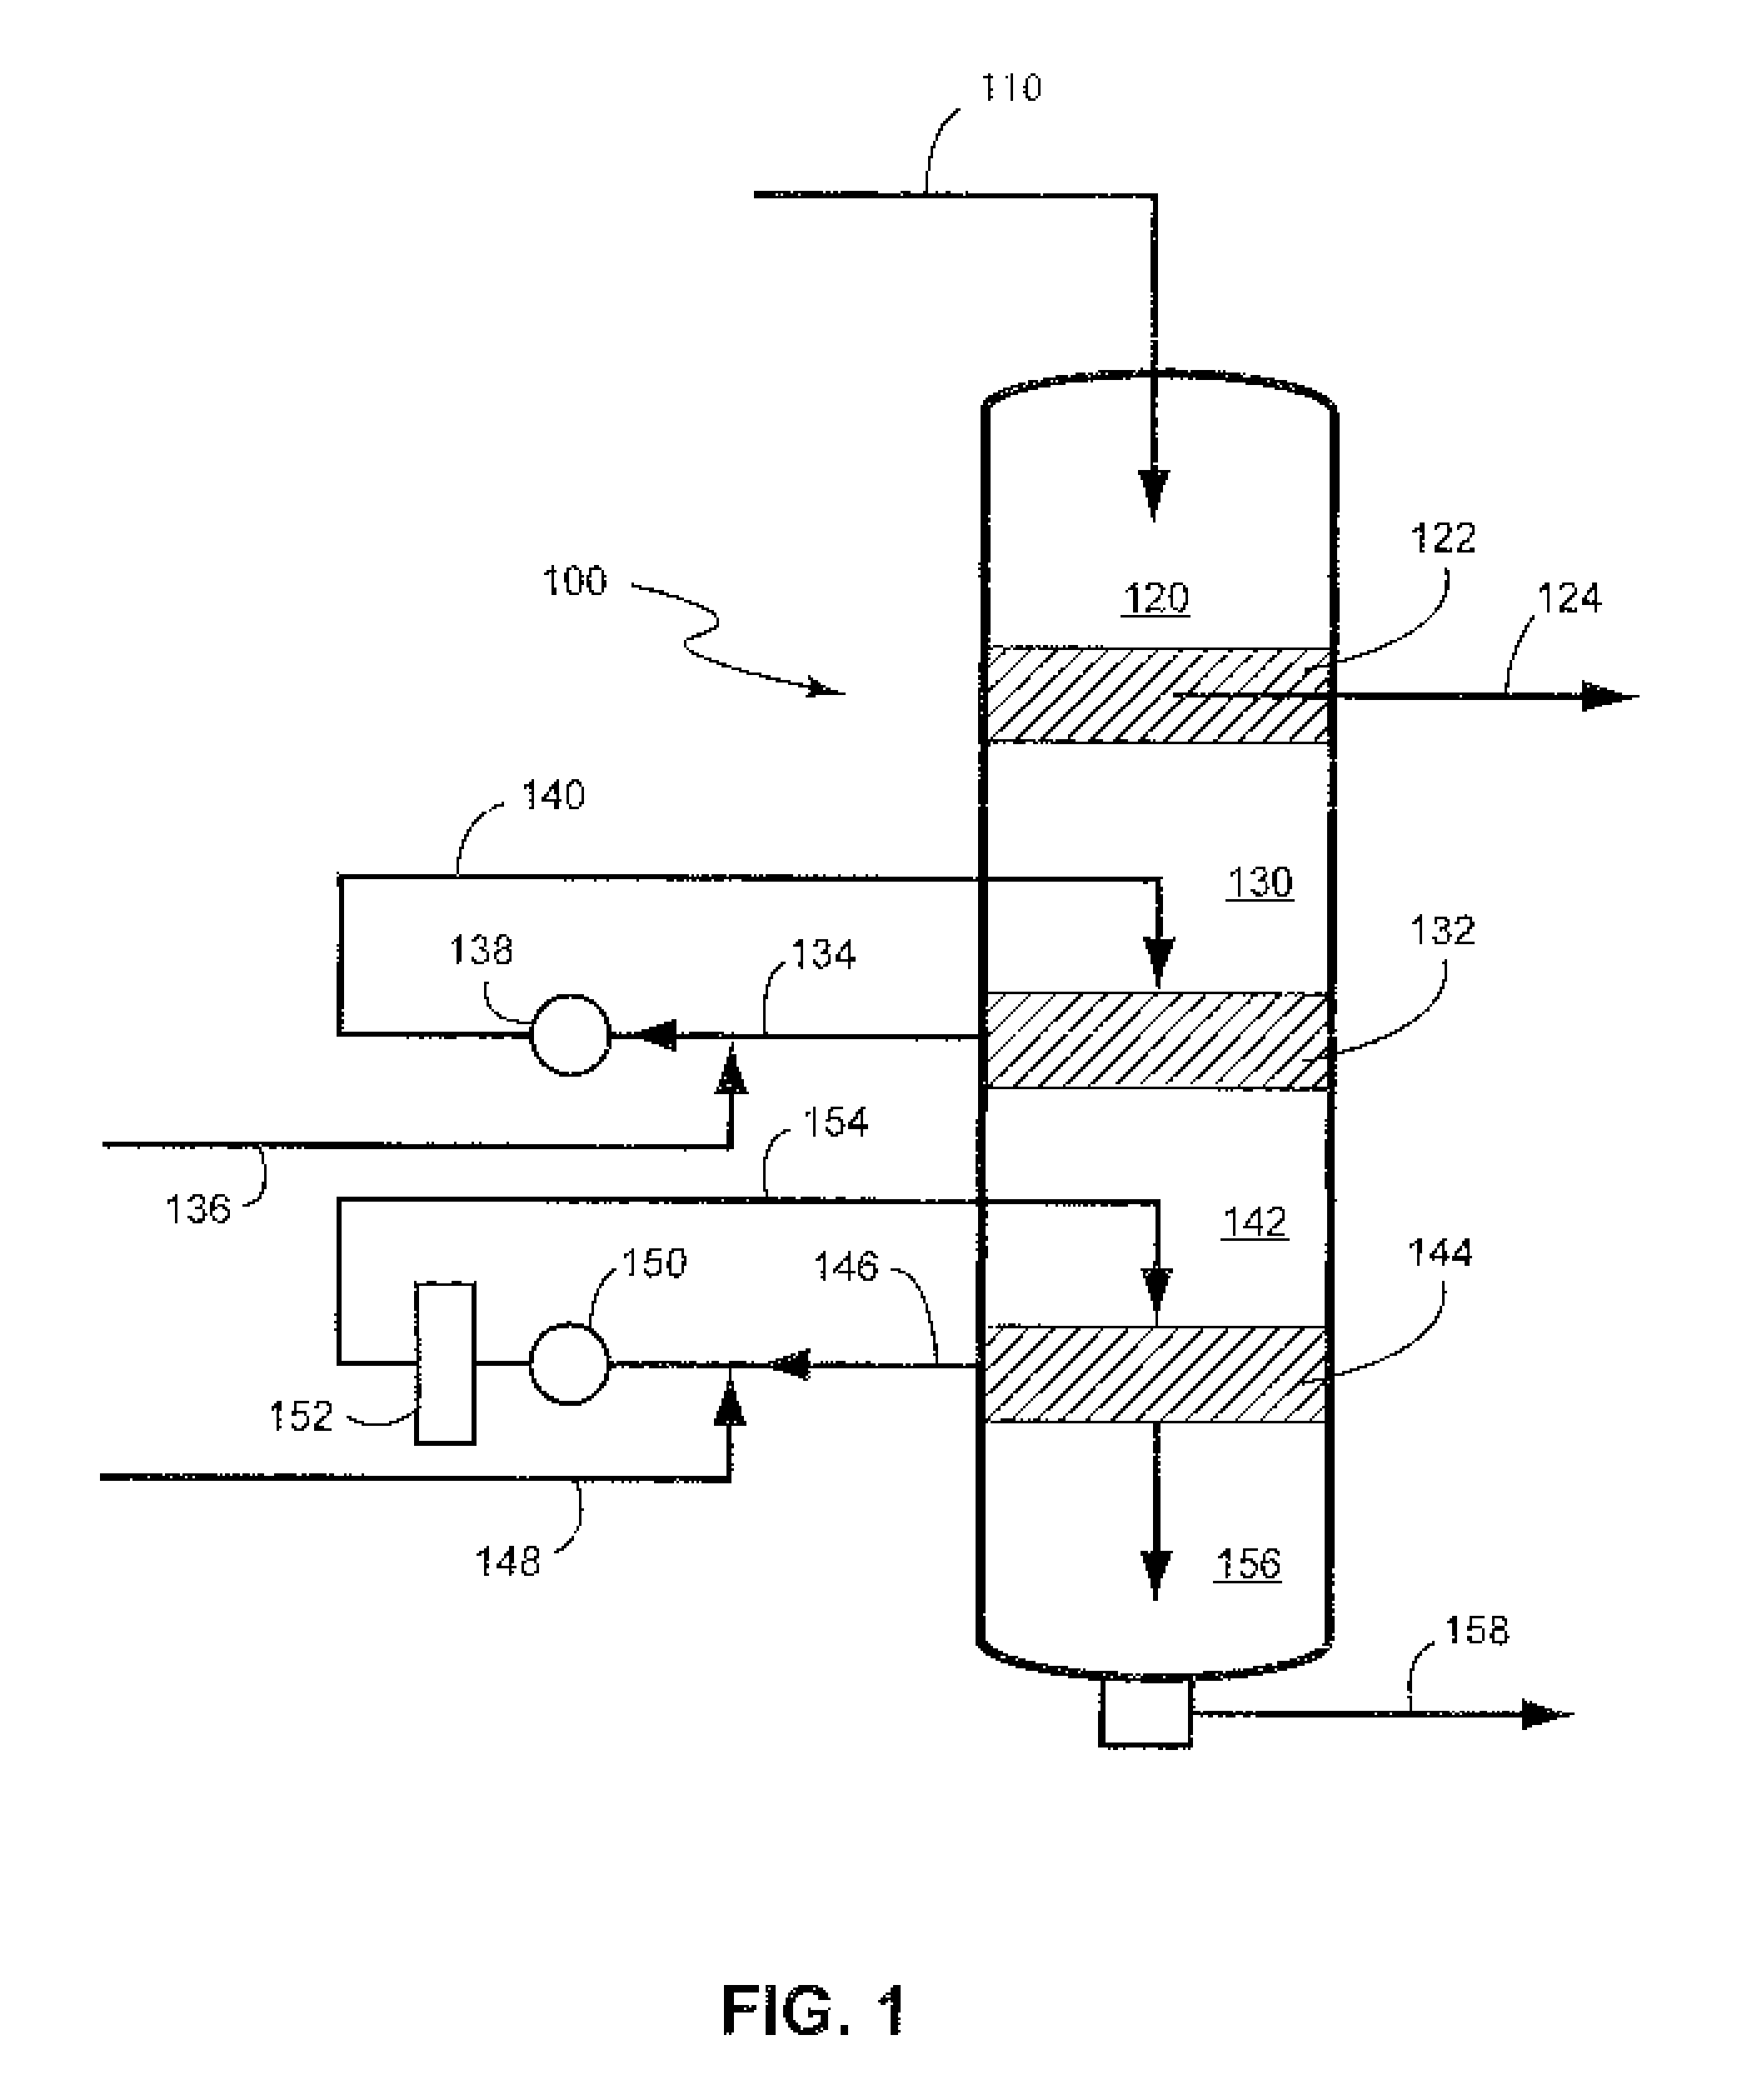 Apparatus and method for hydrolysis of cellulosic material in a multi-step process to produce c5 and c6 sugars using a single vessel